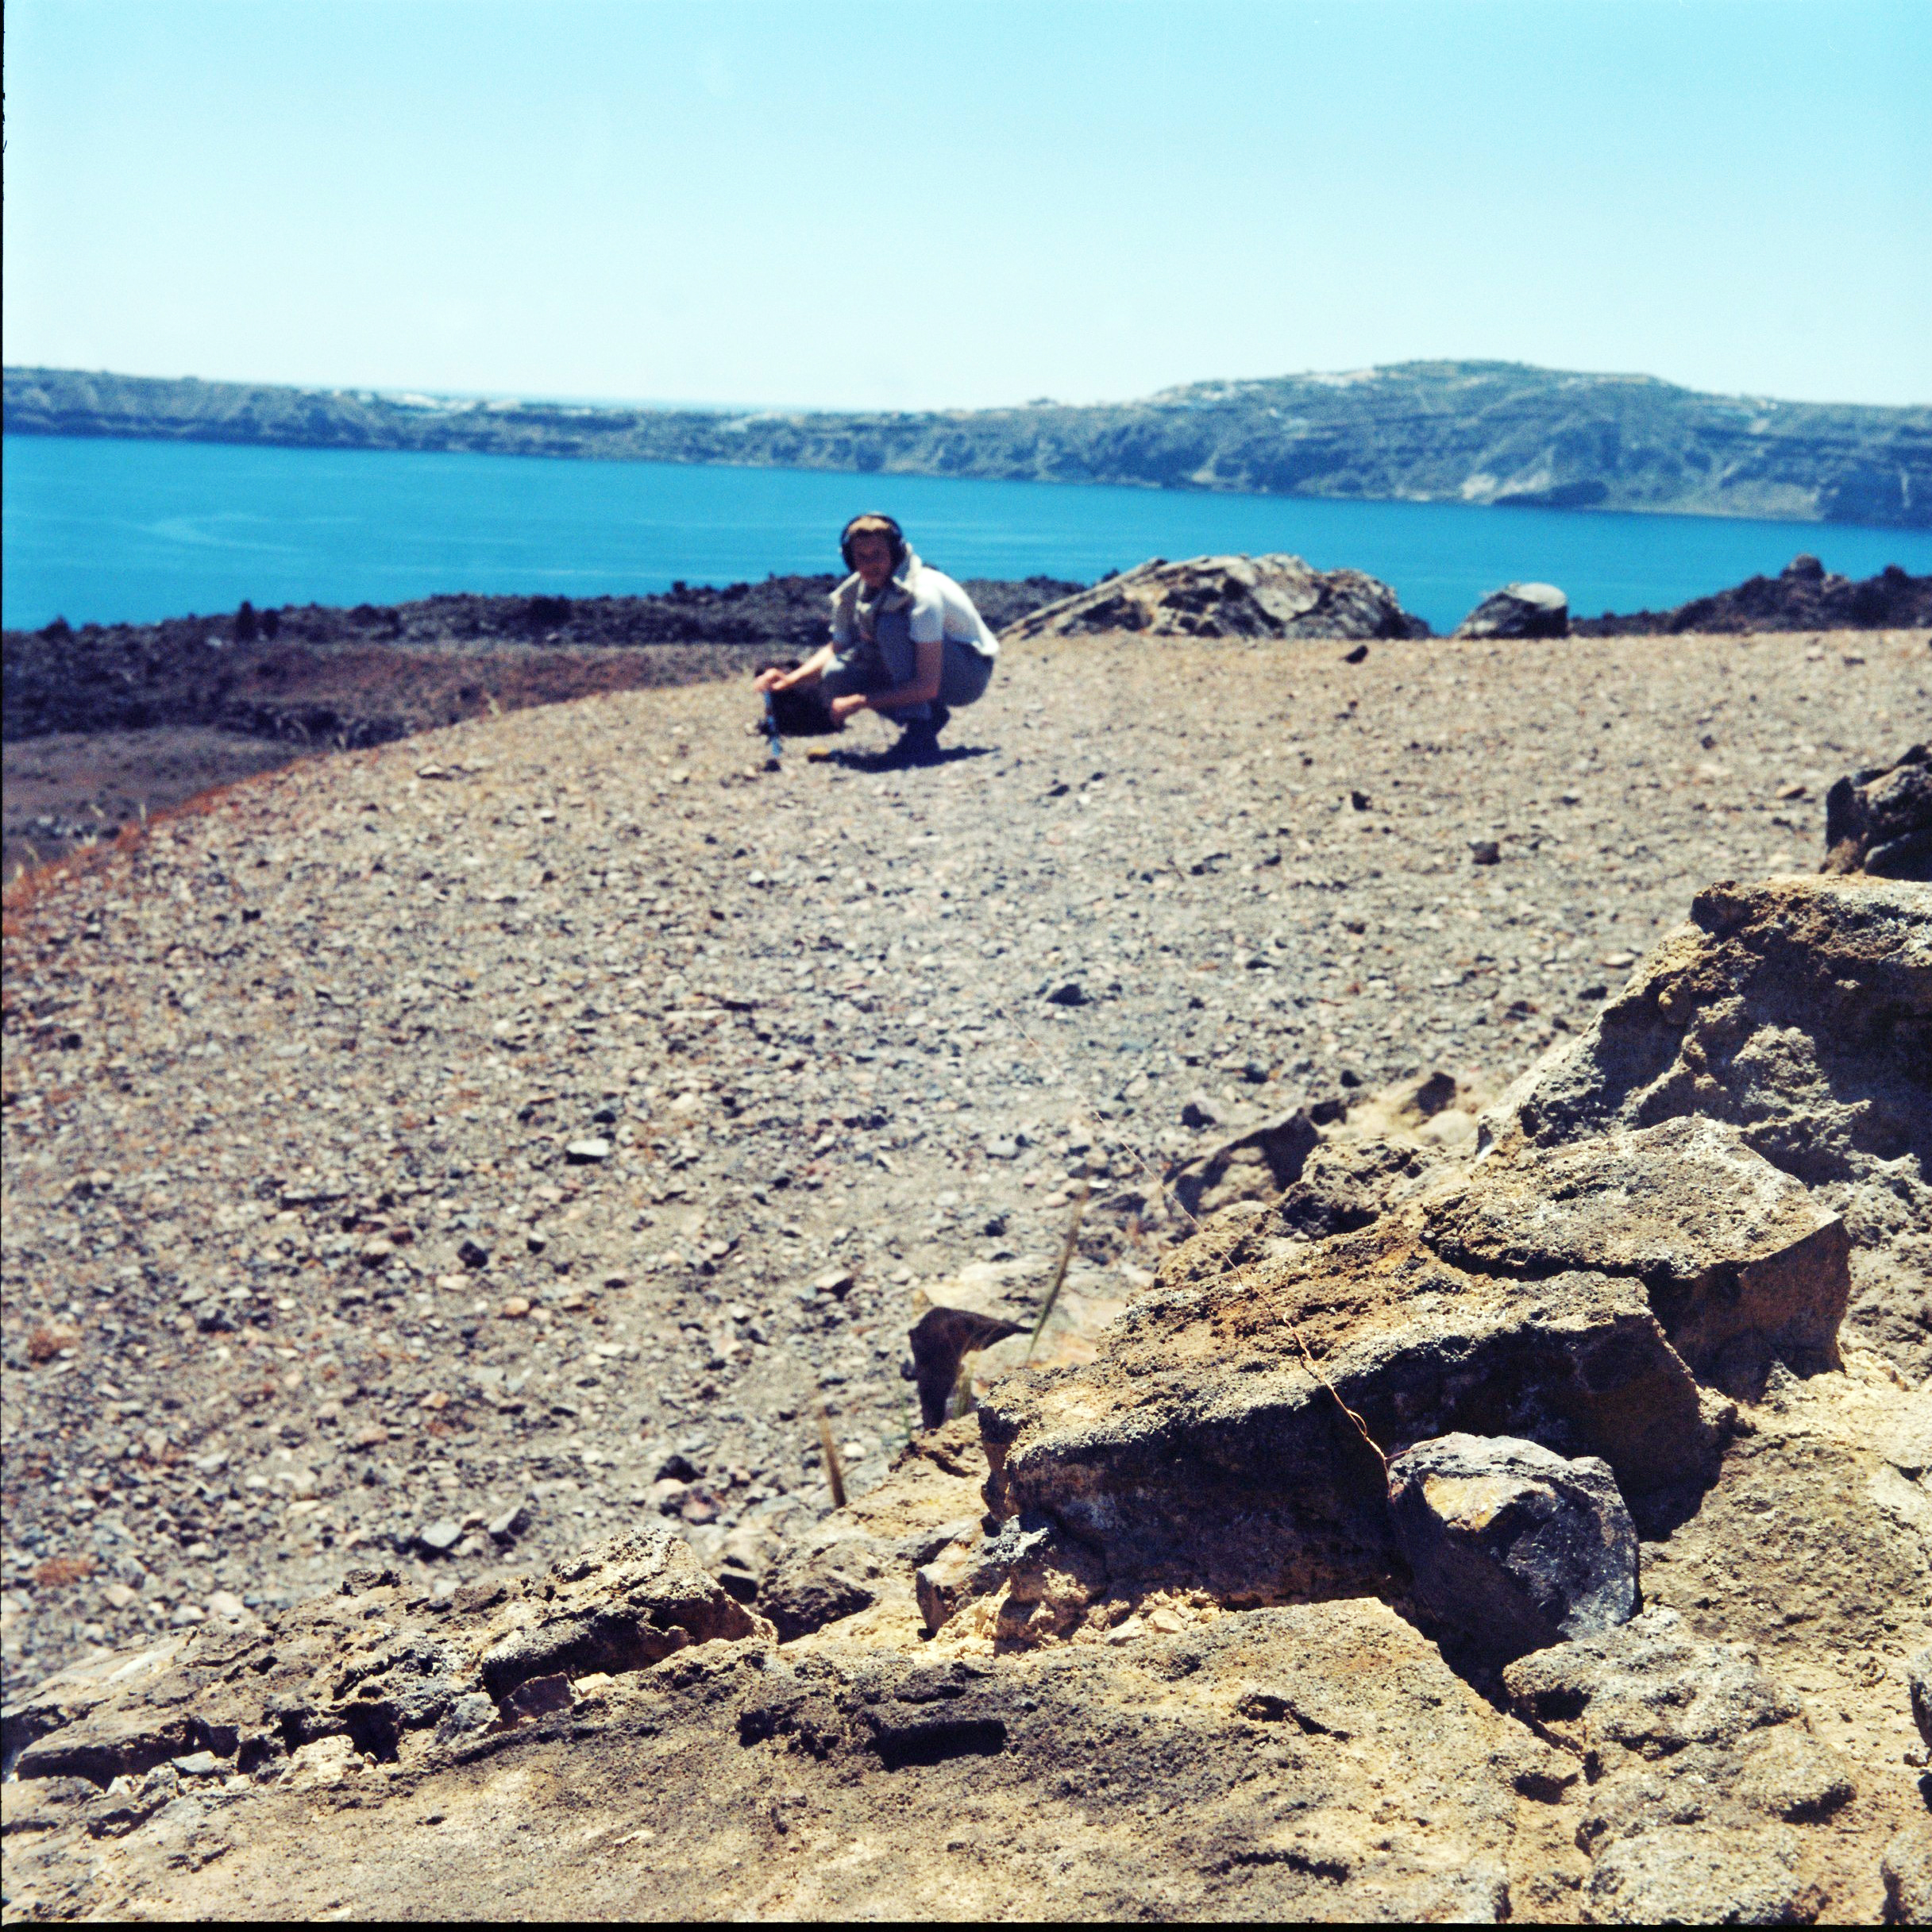 Tamm recording aeolian winds on Nea Kameni (Santorini’s volcanic crater) for Tympanic Tether; photograph by Hermione Spriggs, 2015